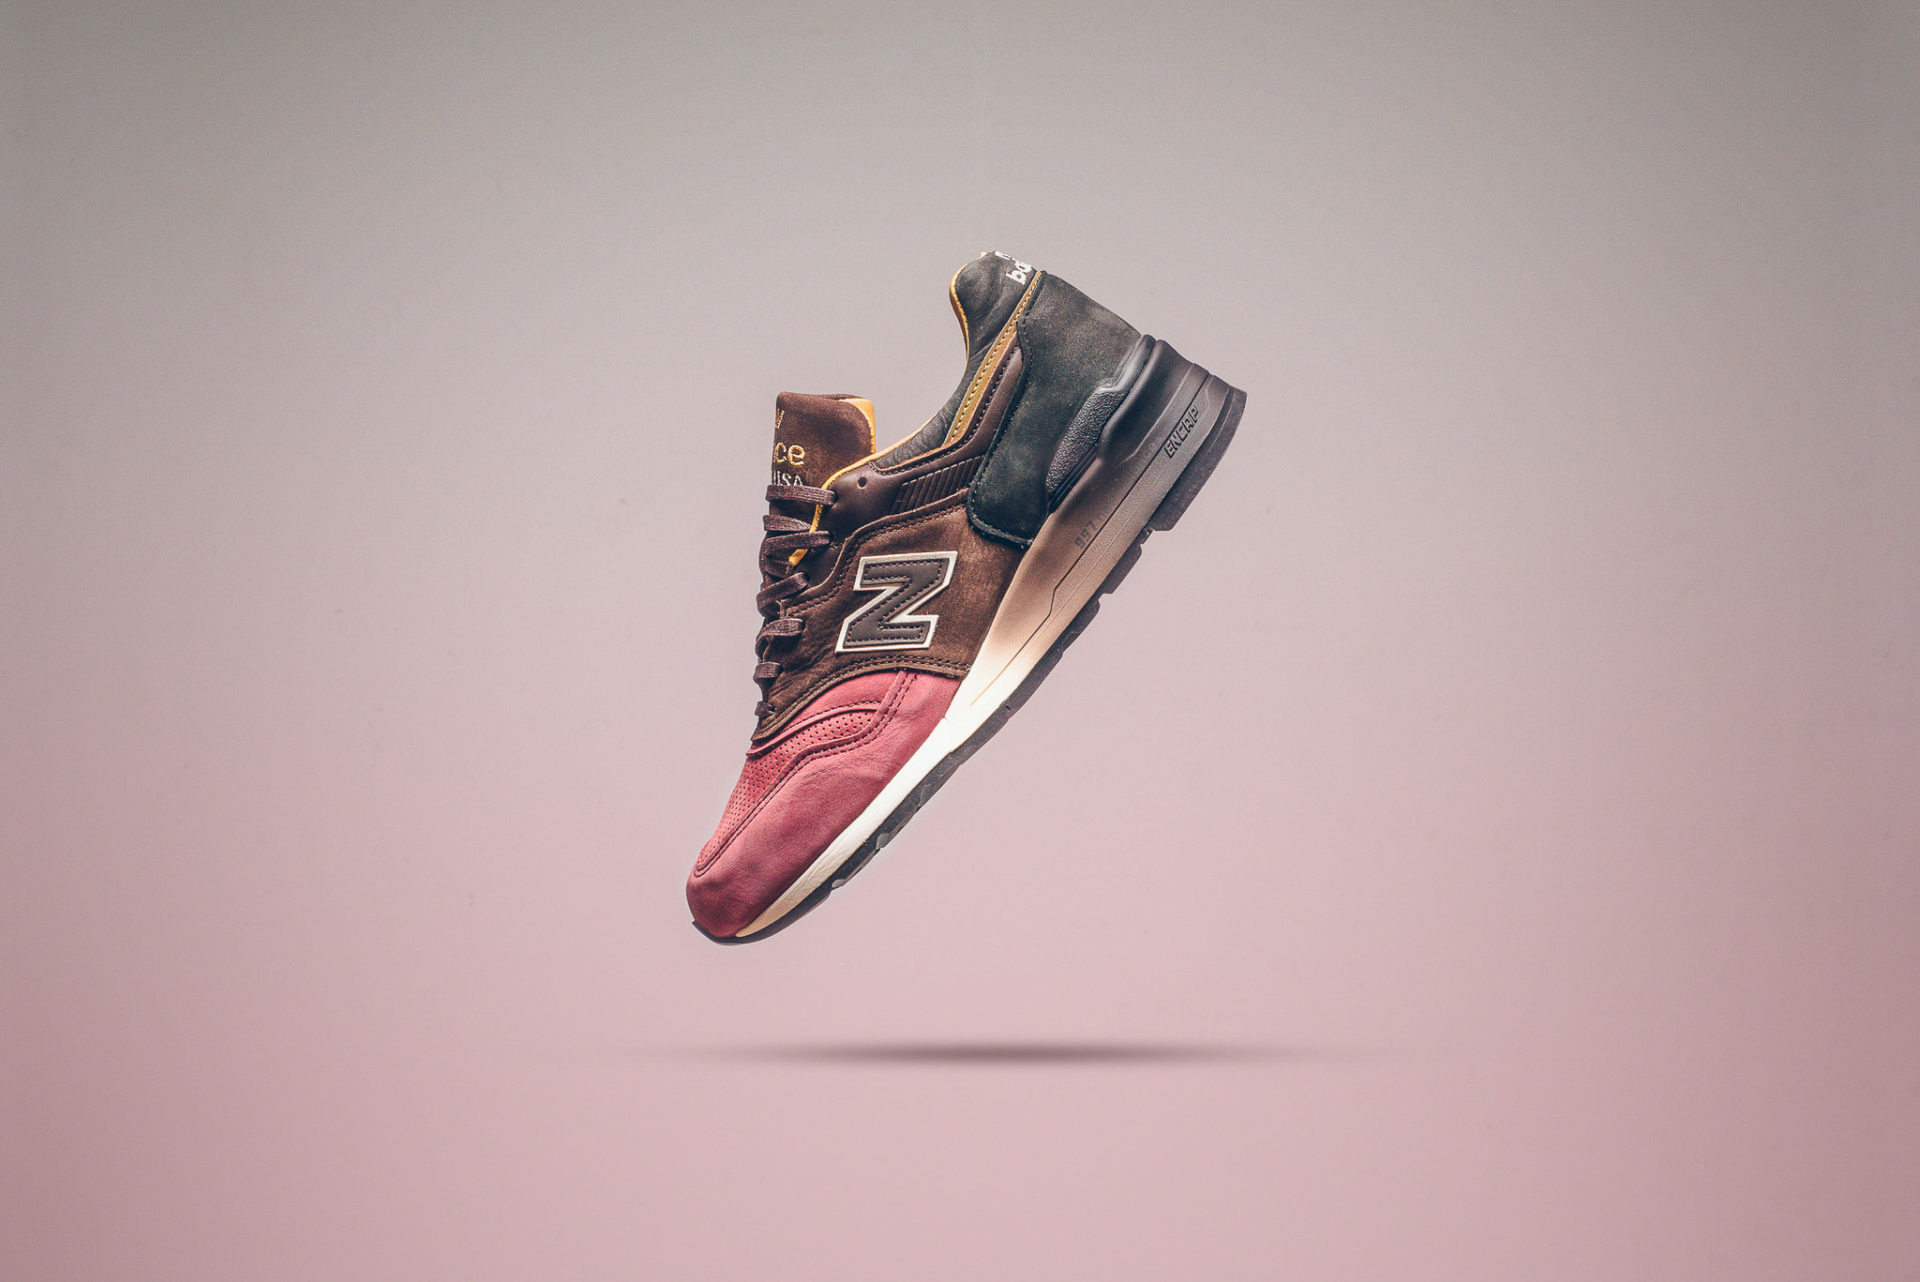 New Balance 997 "Home Plate" Pack